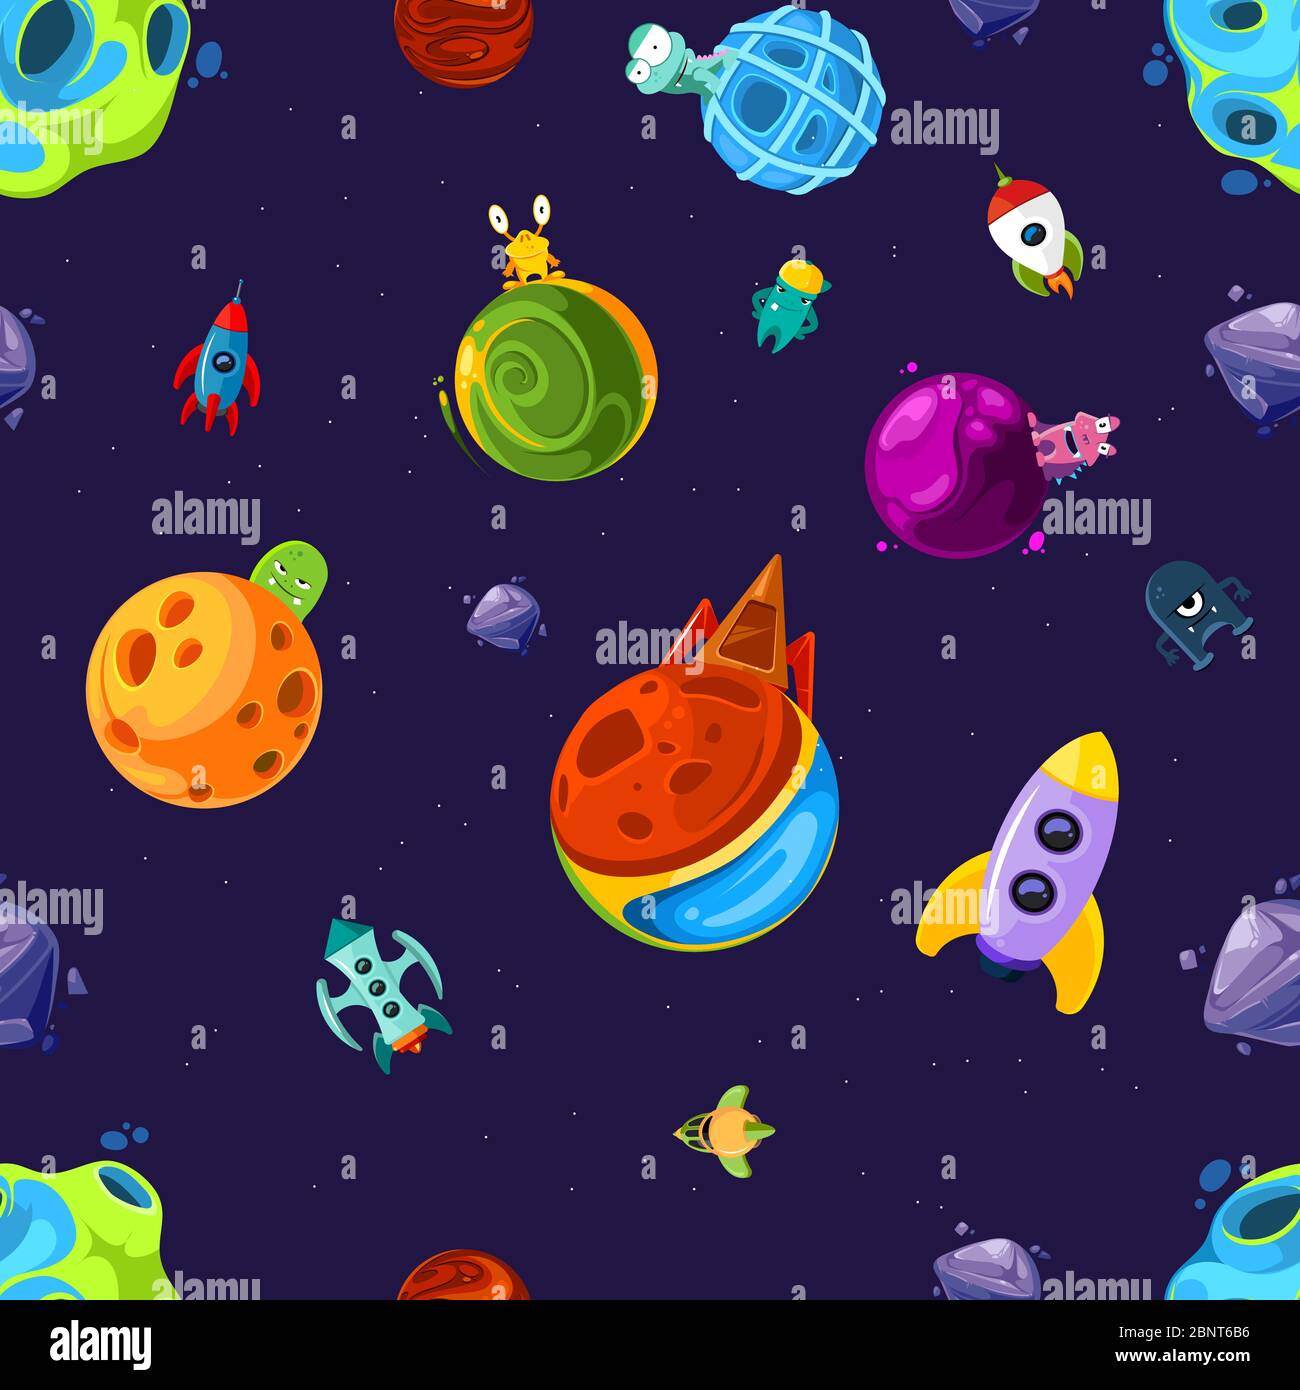 Vector pattern or background illustration with cartoon space planets and ships Stock Vector